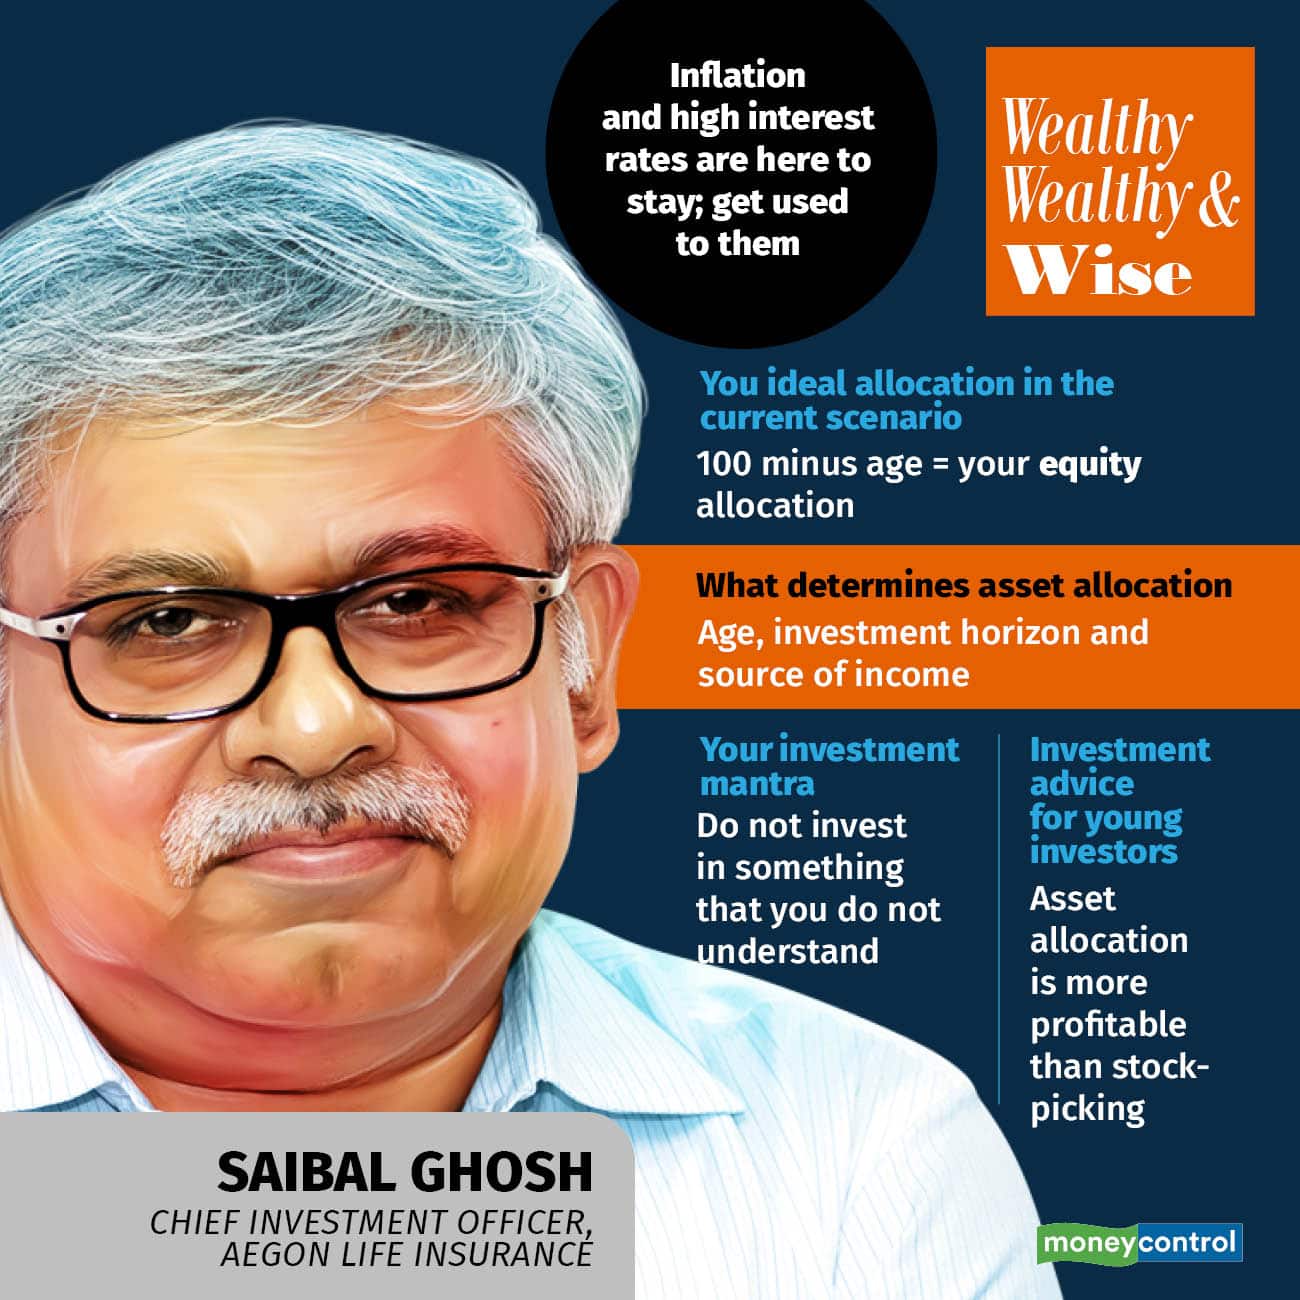 Saibal Ghosh, Chief Investment Officer at Aegon Life Insurance says his investments in equities have come down since he is closer to retirement. Ghosh prefers fund managers, over making direct investments in equity and debt markets. 